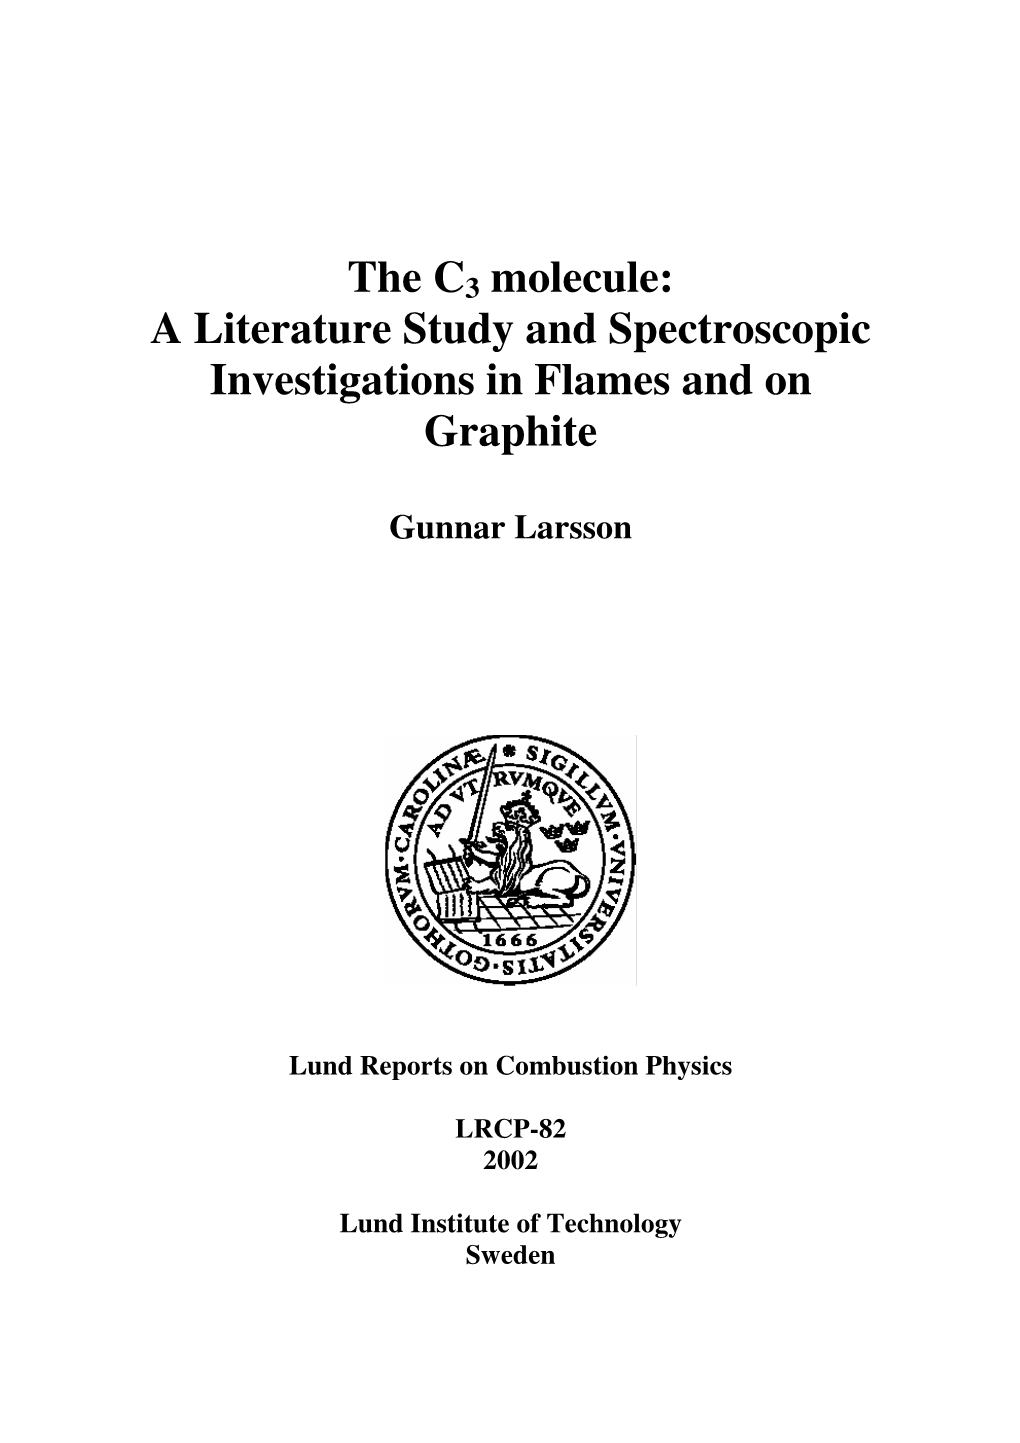 The C3 Molecule: a Literature Study and Spectroscopic Investigations in Flames and on Graphite